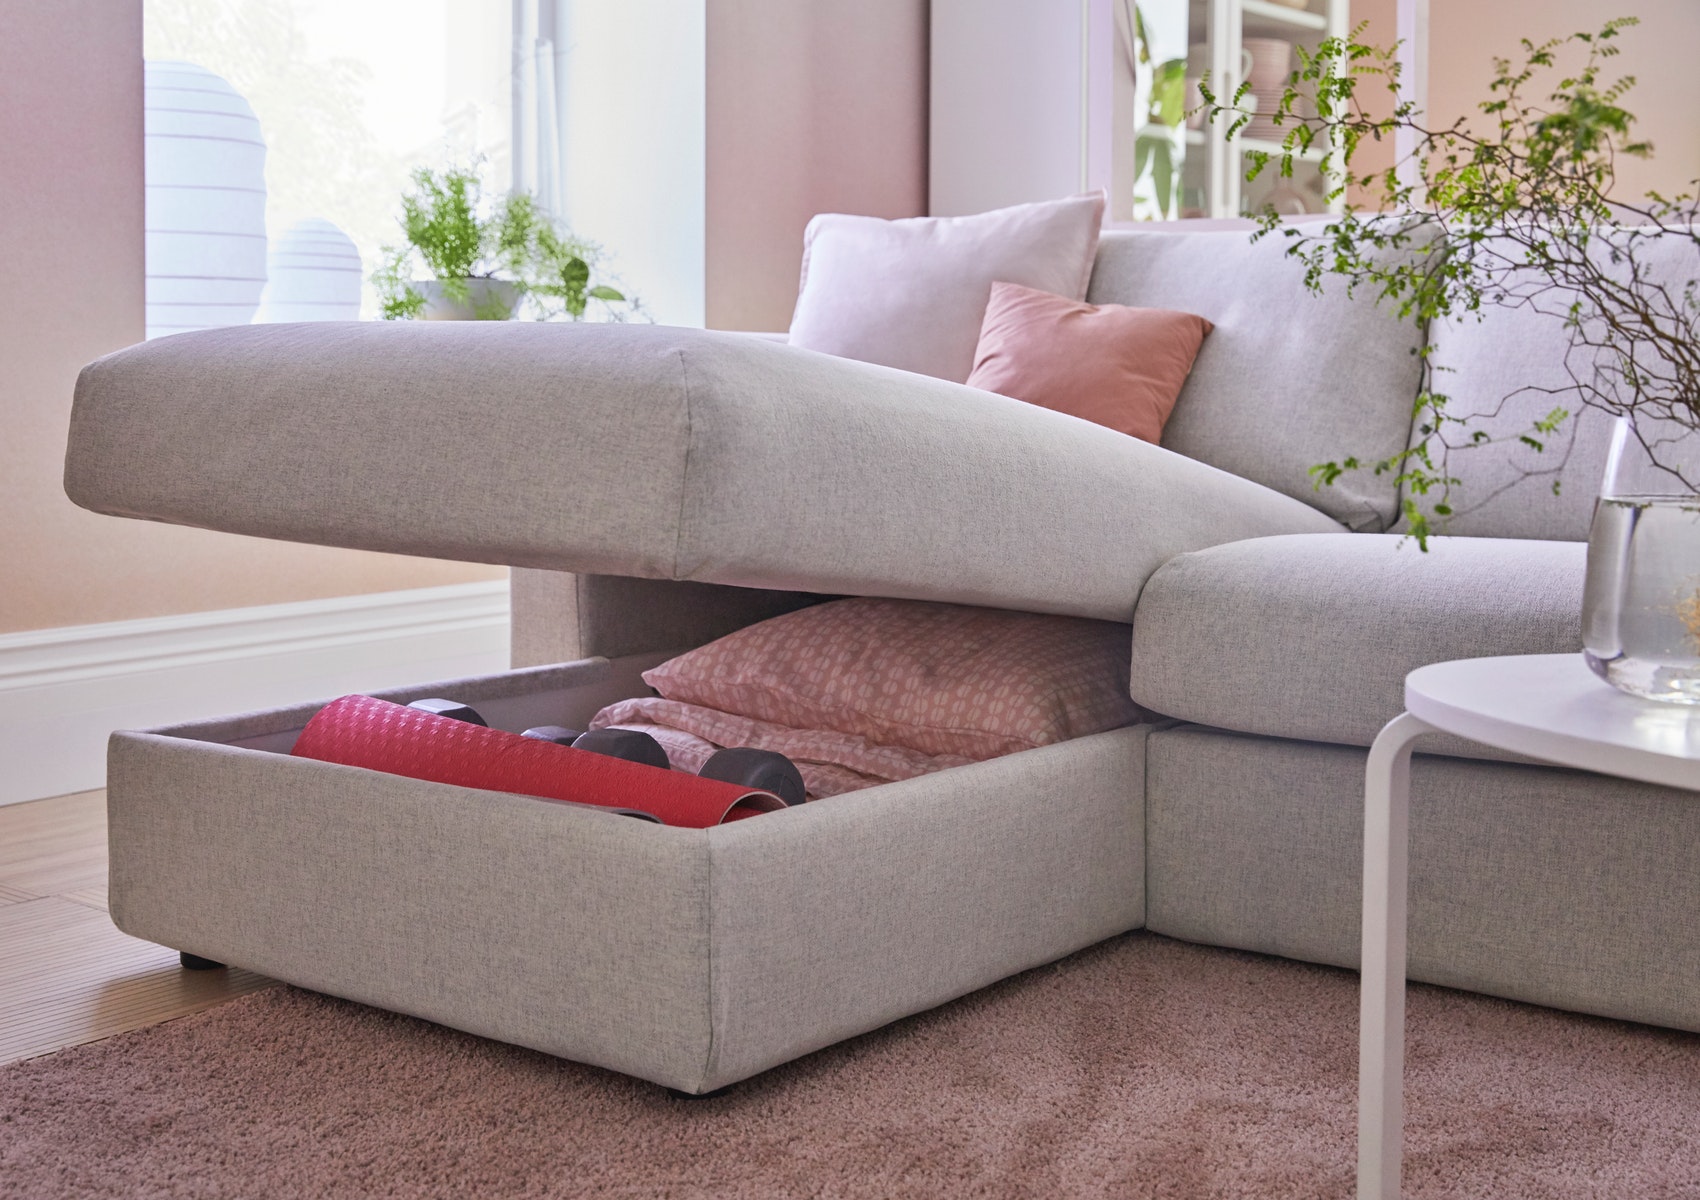 The 7 best sofas to bring comfort in a compact living room - IKEA Indonesia